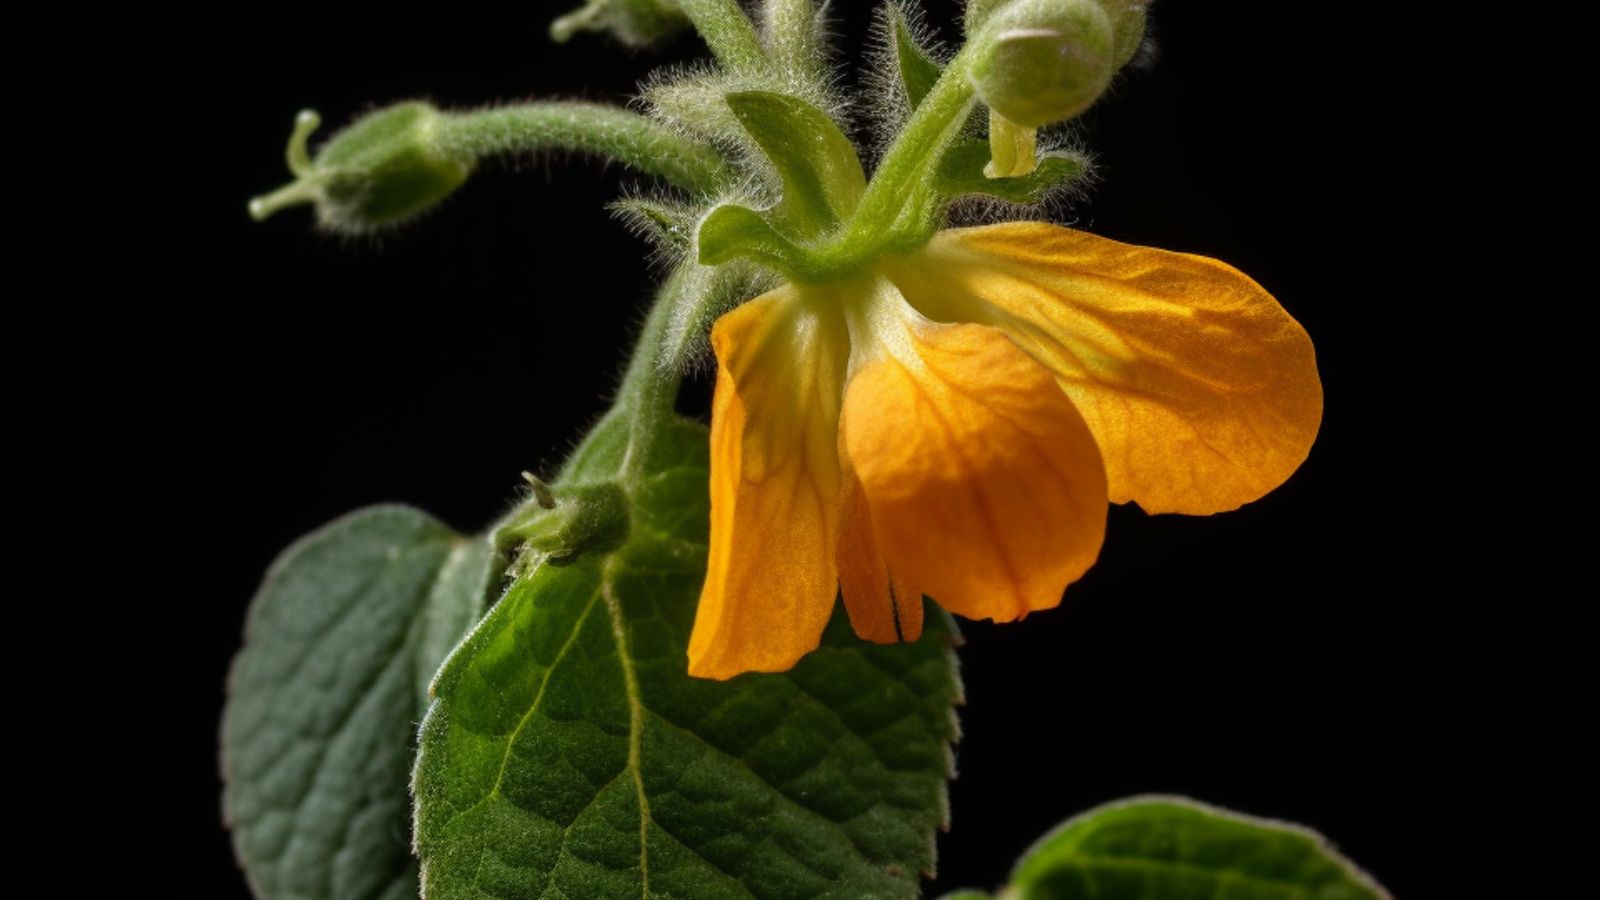 Looking for a natural remedy for poison ivy and other skin irritations? Learn how to make your own DIY jewelweed salve with this easy recipe!